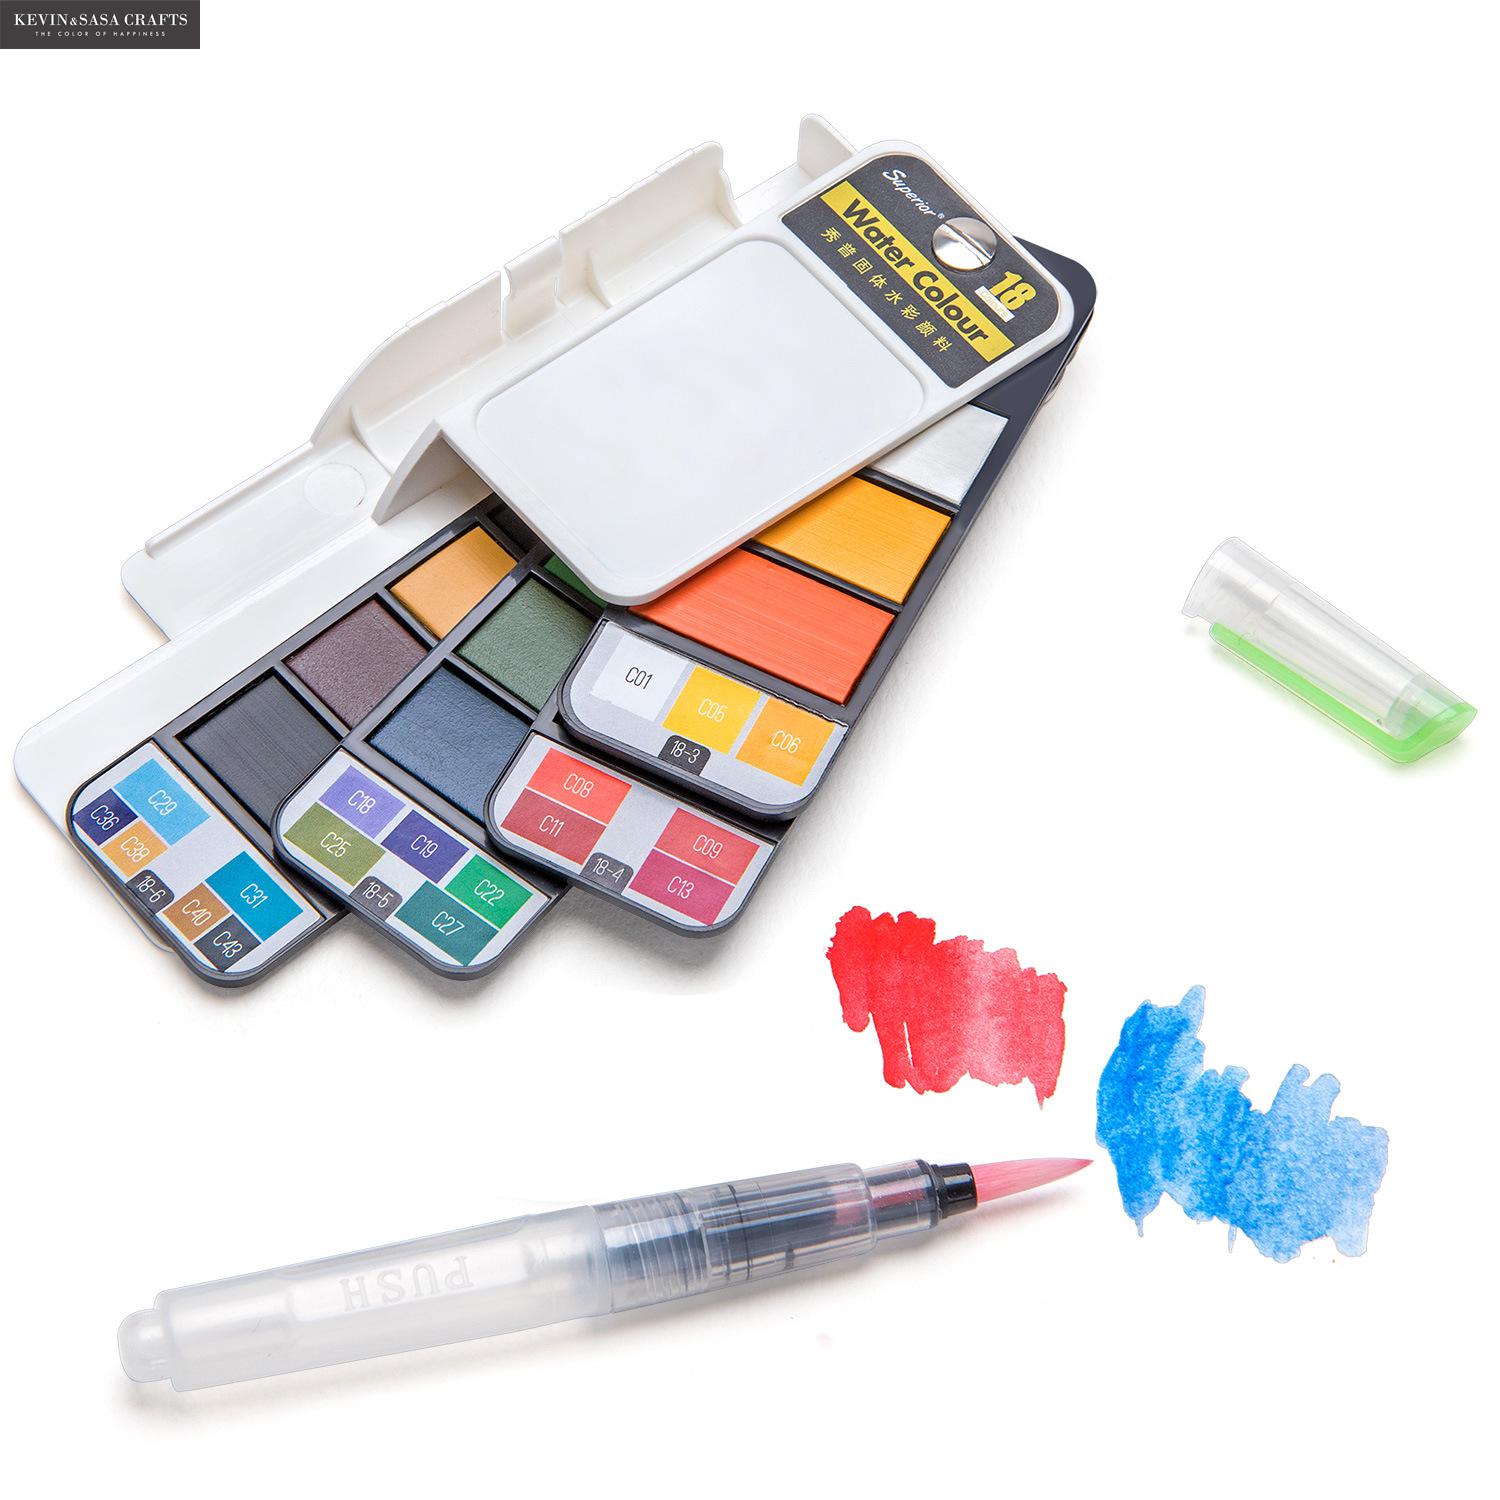 New Quality Solid Water Color Paint Set With Water Brush Pen Portable Watercolor For Drawing Art Supplies Art Set For Kids